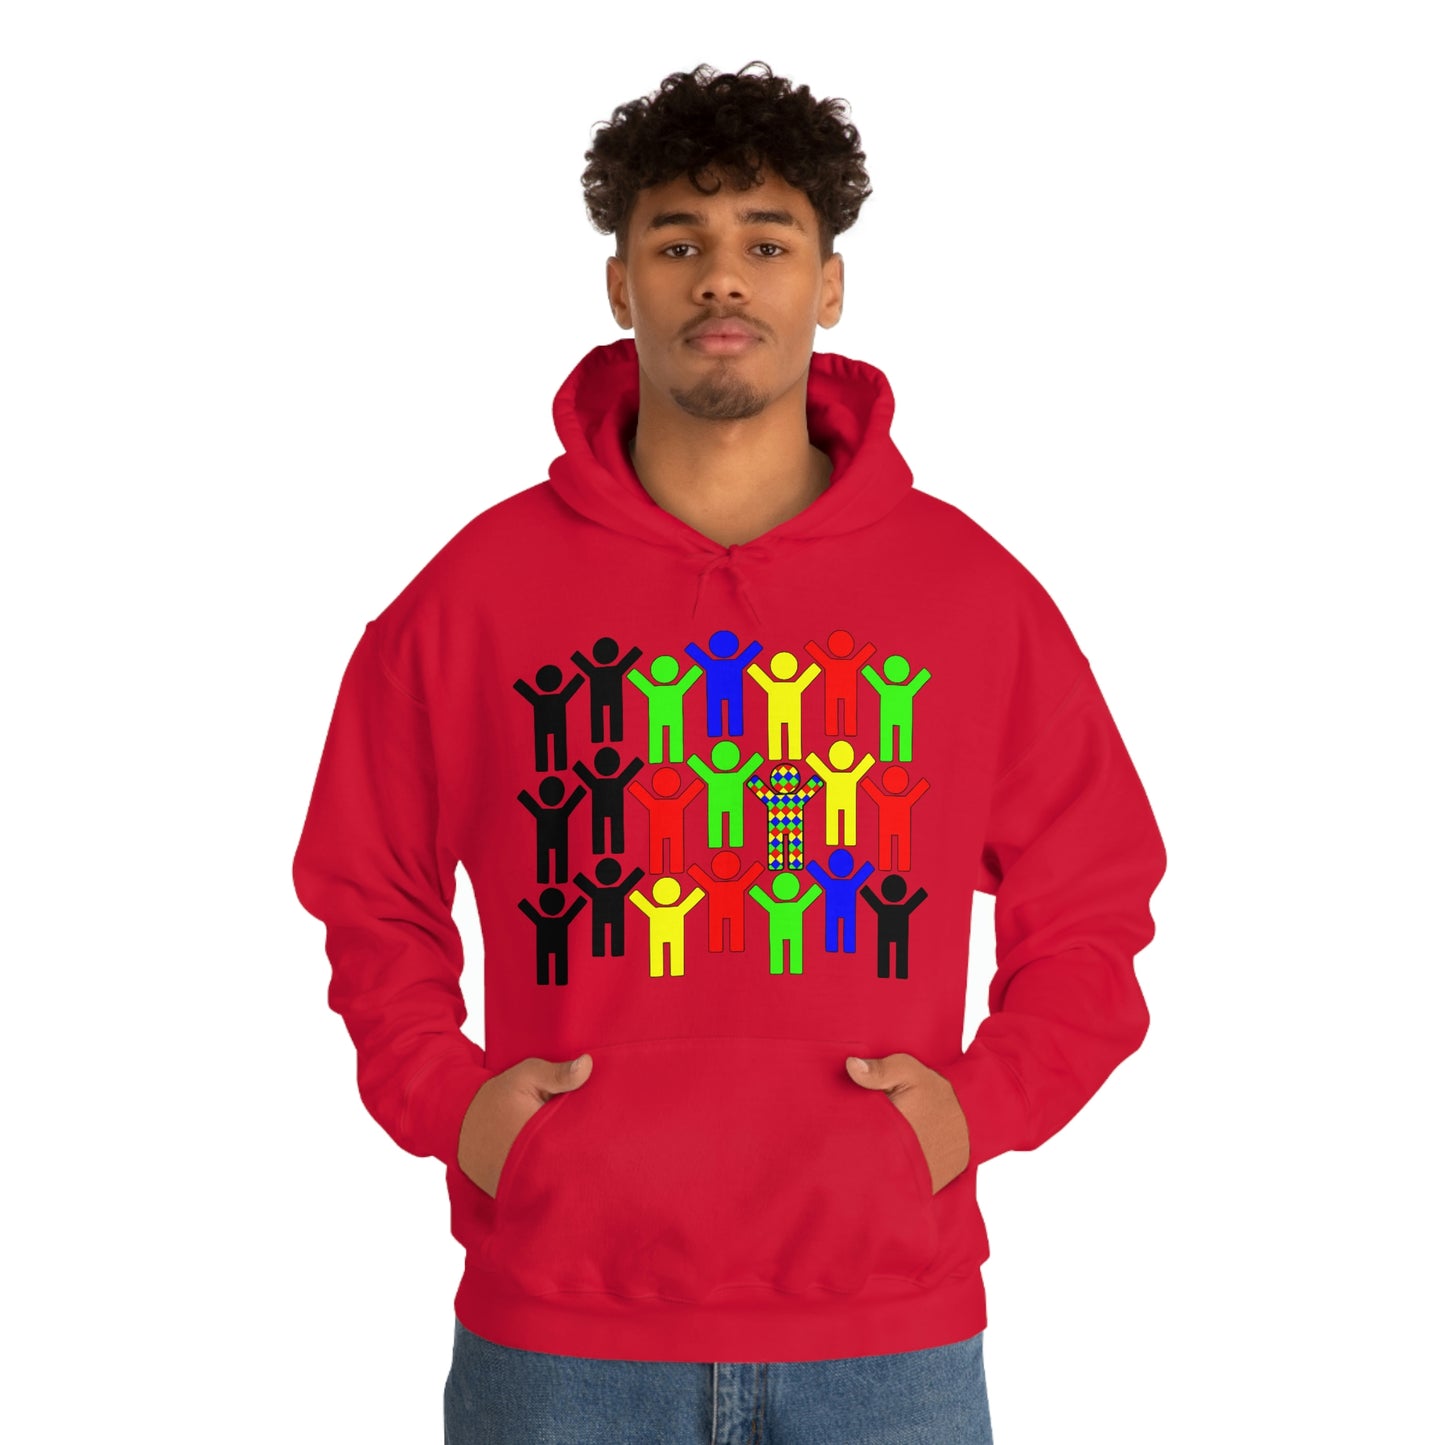 Unisex Heavy Blend™ Hooded Sweatshirt "Change the world by changing yourself"